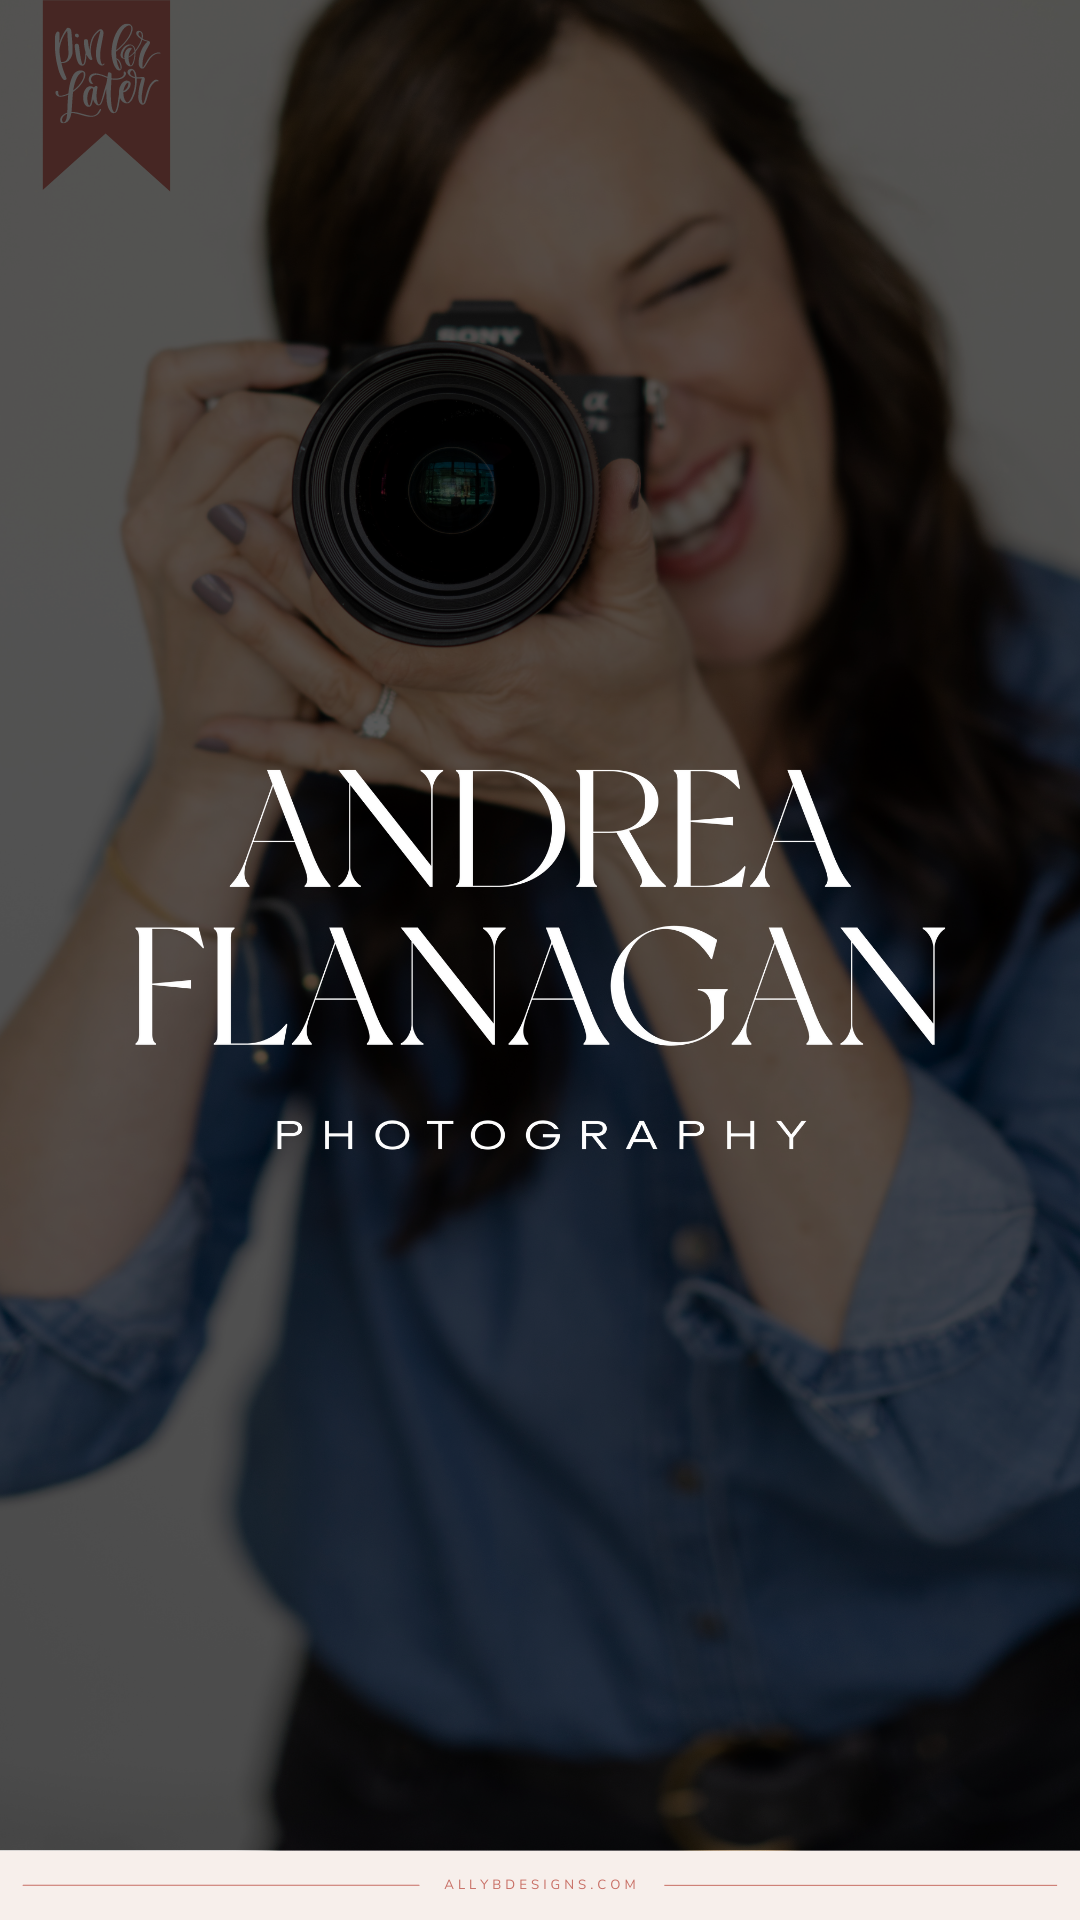 Andrea Flanagan smiling with a sony camera to her eye posed to take take a photo. Over her image is text that reads "Andrea Flanagan Photography". Across the bottom of the image is text that reads "allybdesigns.com".